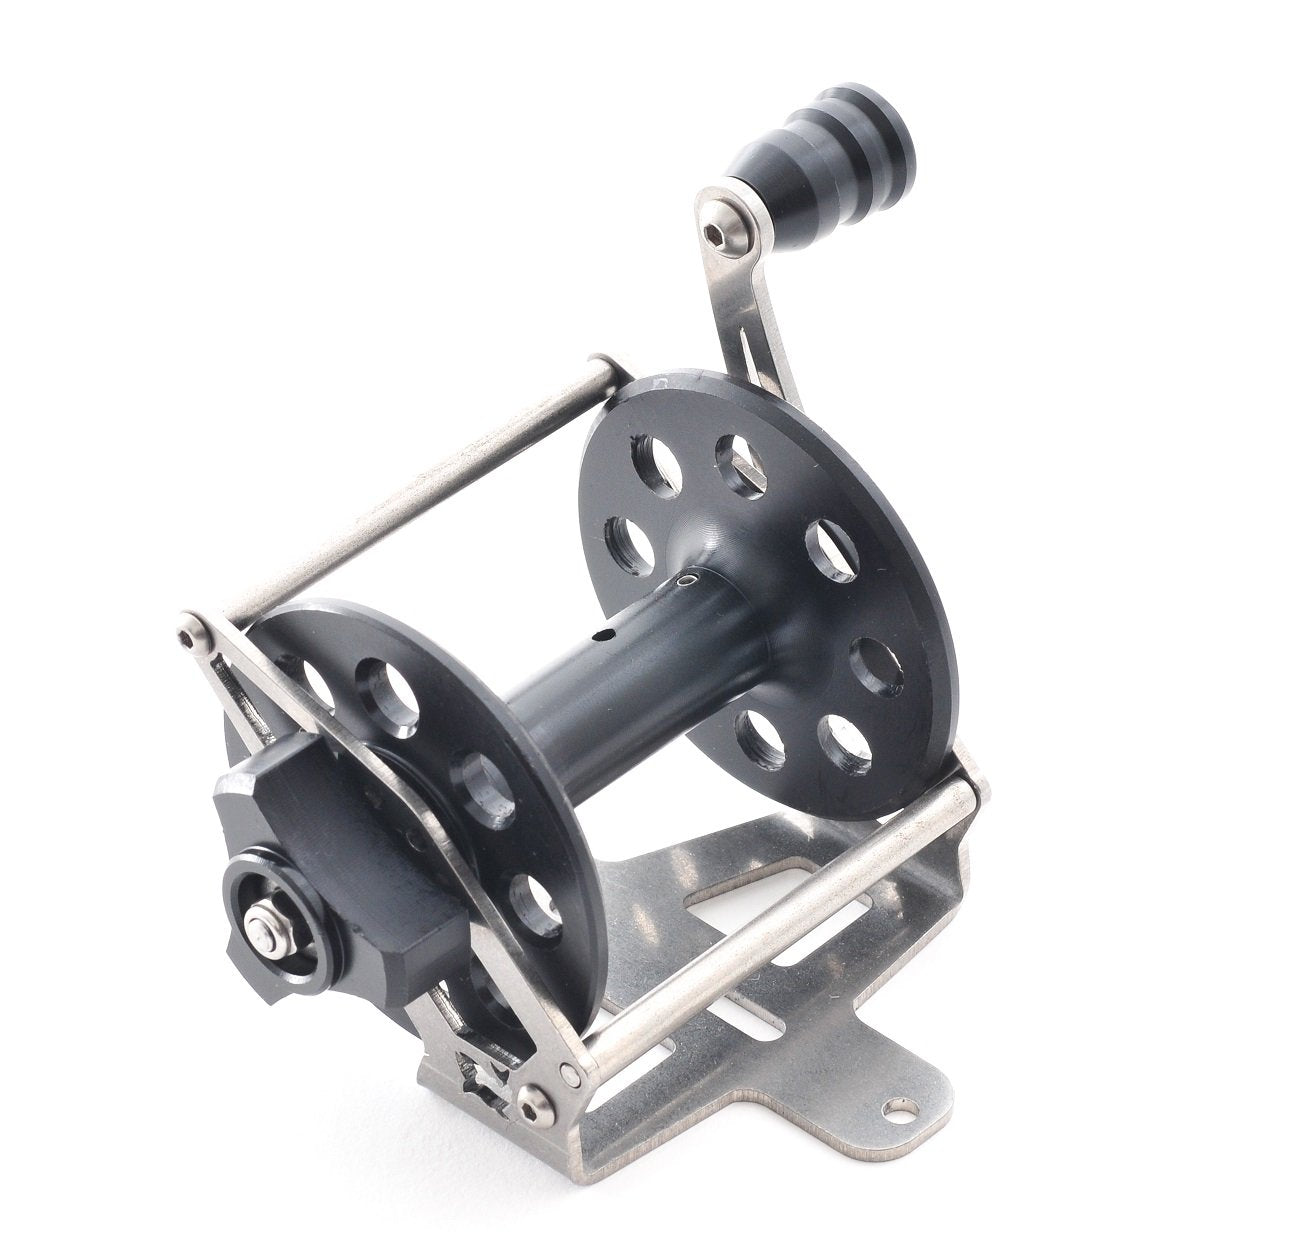 SpearPro Drag System Vertical Reel 100m - Spearfishing Experts